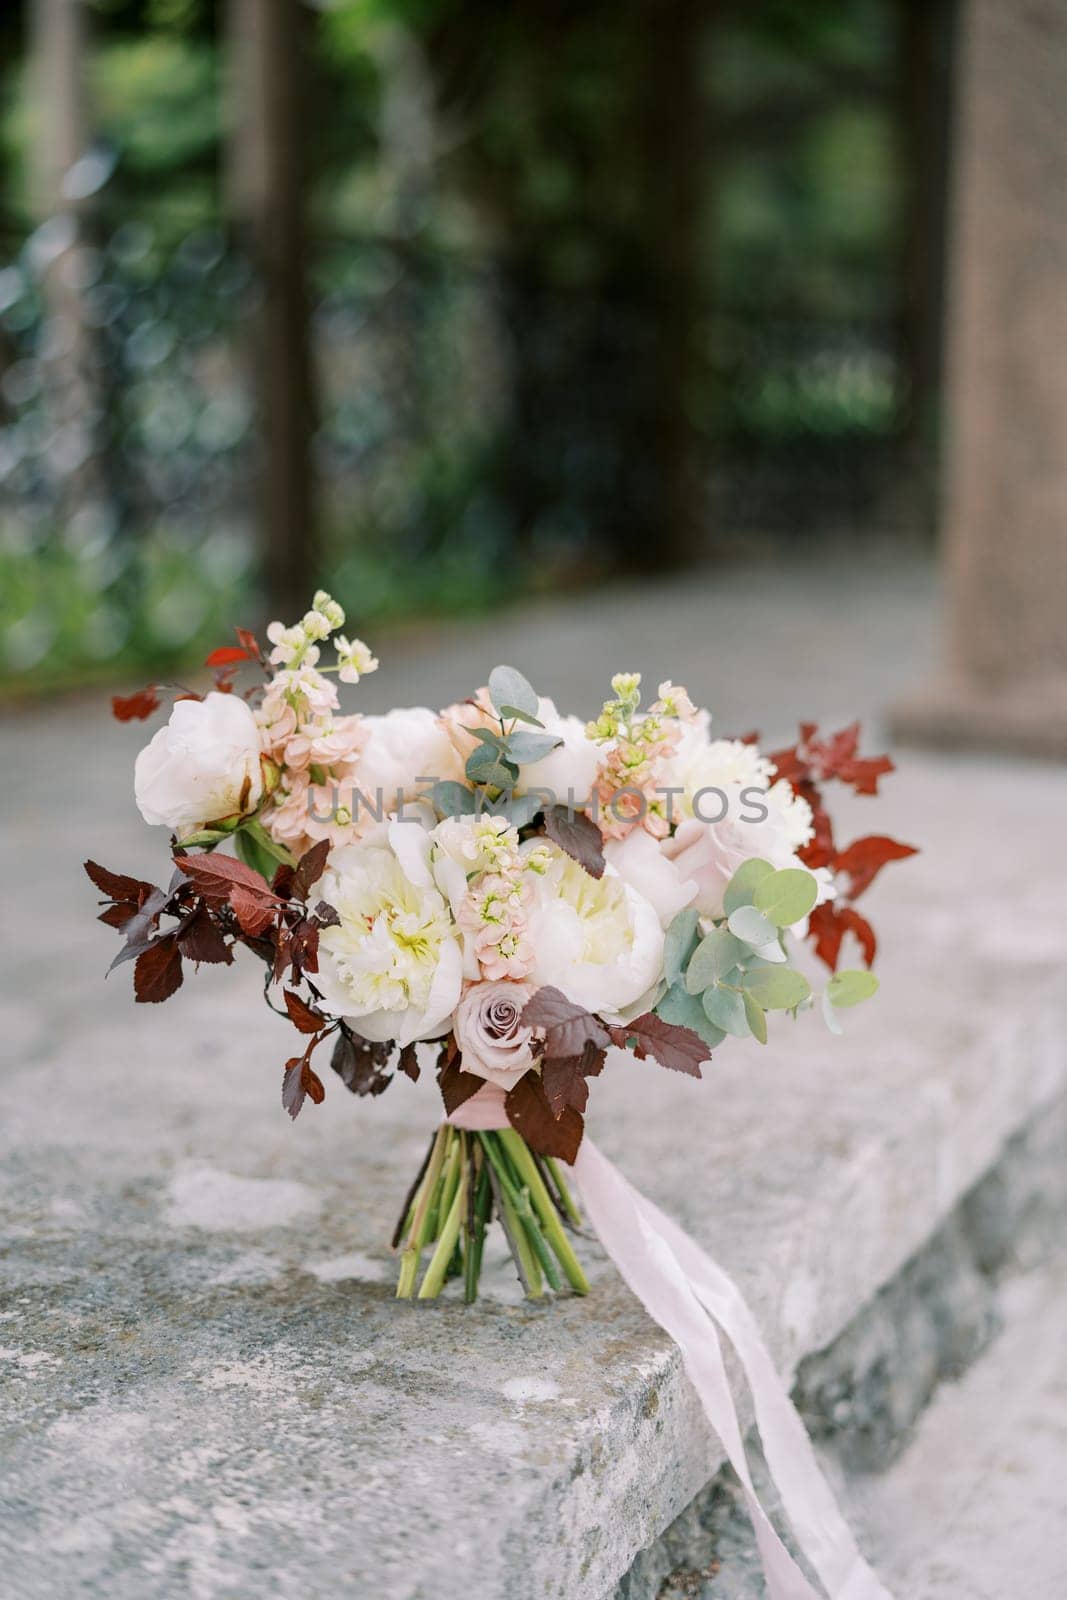 Wedding bouquet stands on a stone slab in the garden. High quality photo